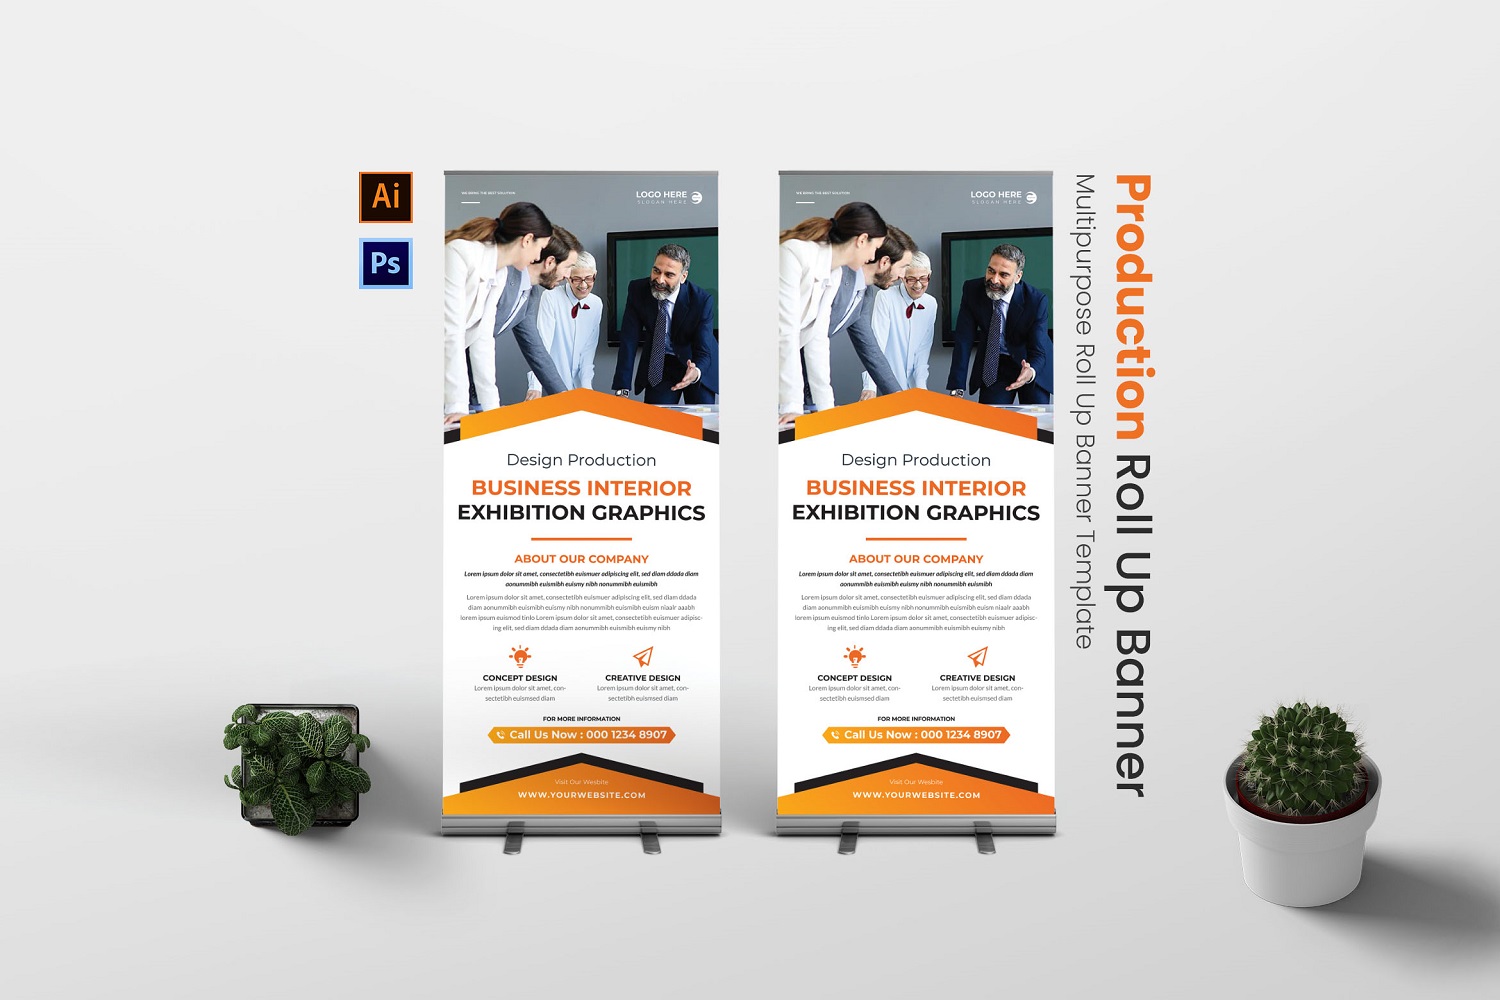 Design Production Roll Up Banner